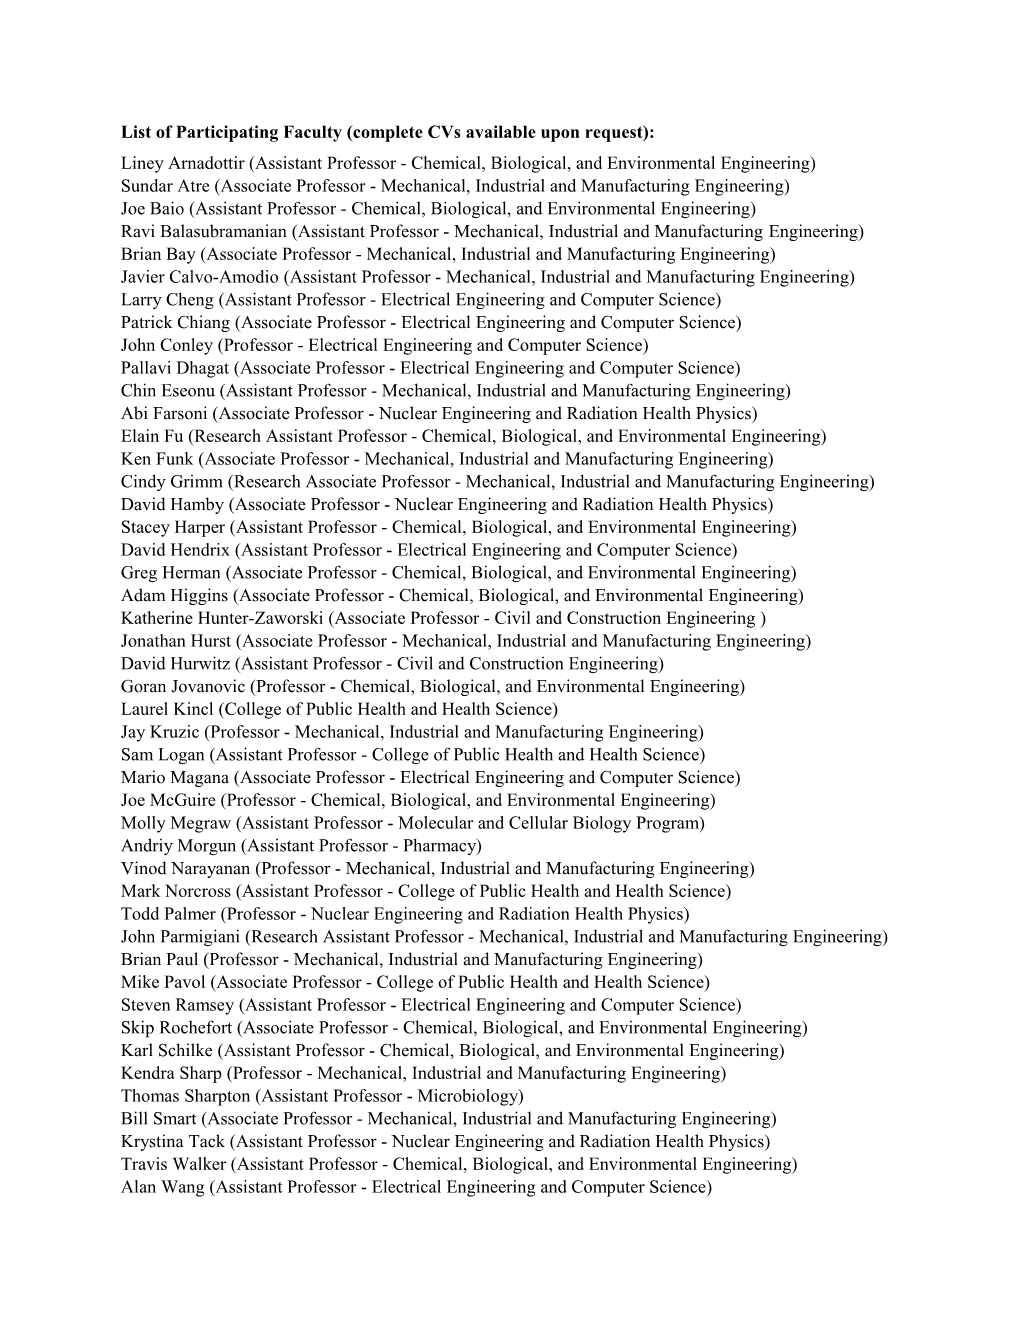 List of Participating Faculty (Complete Cvs Available Upon Request)